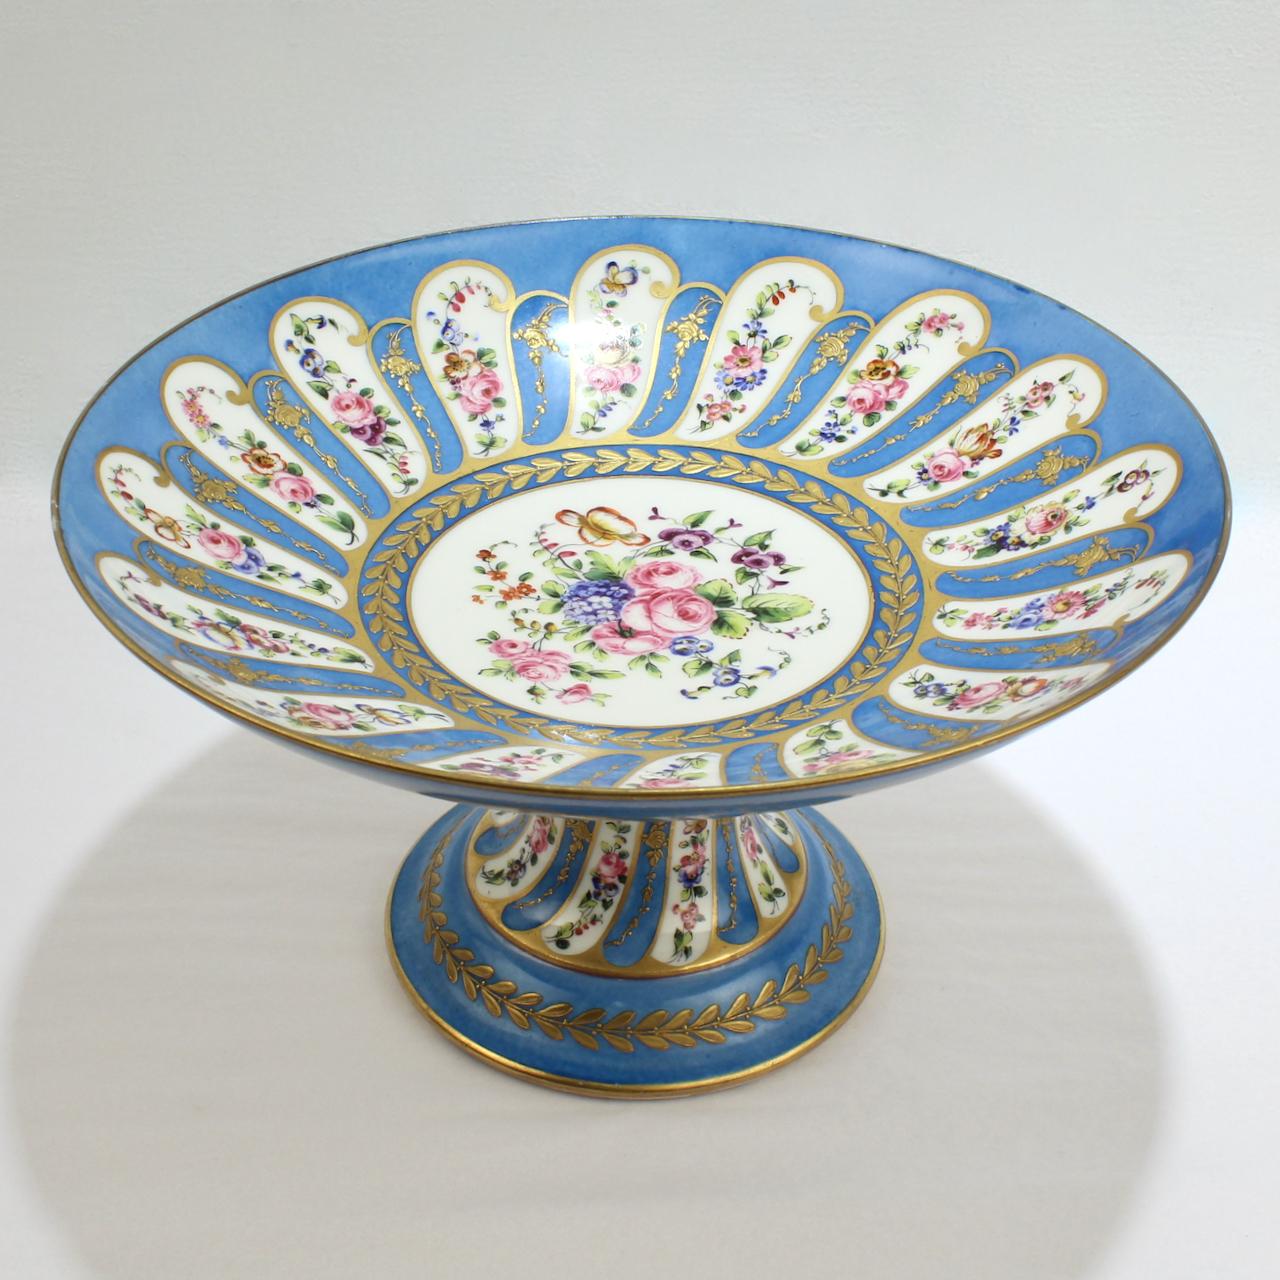 A very fine antique French celeste bleu ground porcelain tazza or footed compote.

By Charles Pillivuyt & Co of Methun, France.

Decorated with a celeste bleu (or blue) powdered ground, raised gold decoration, and hand painted floral